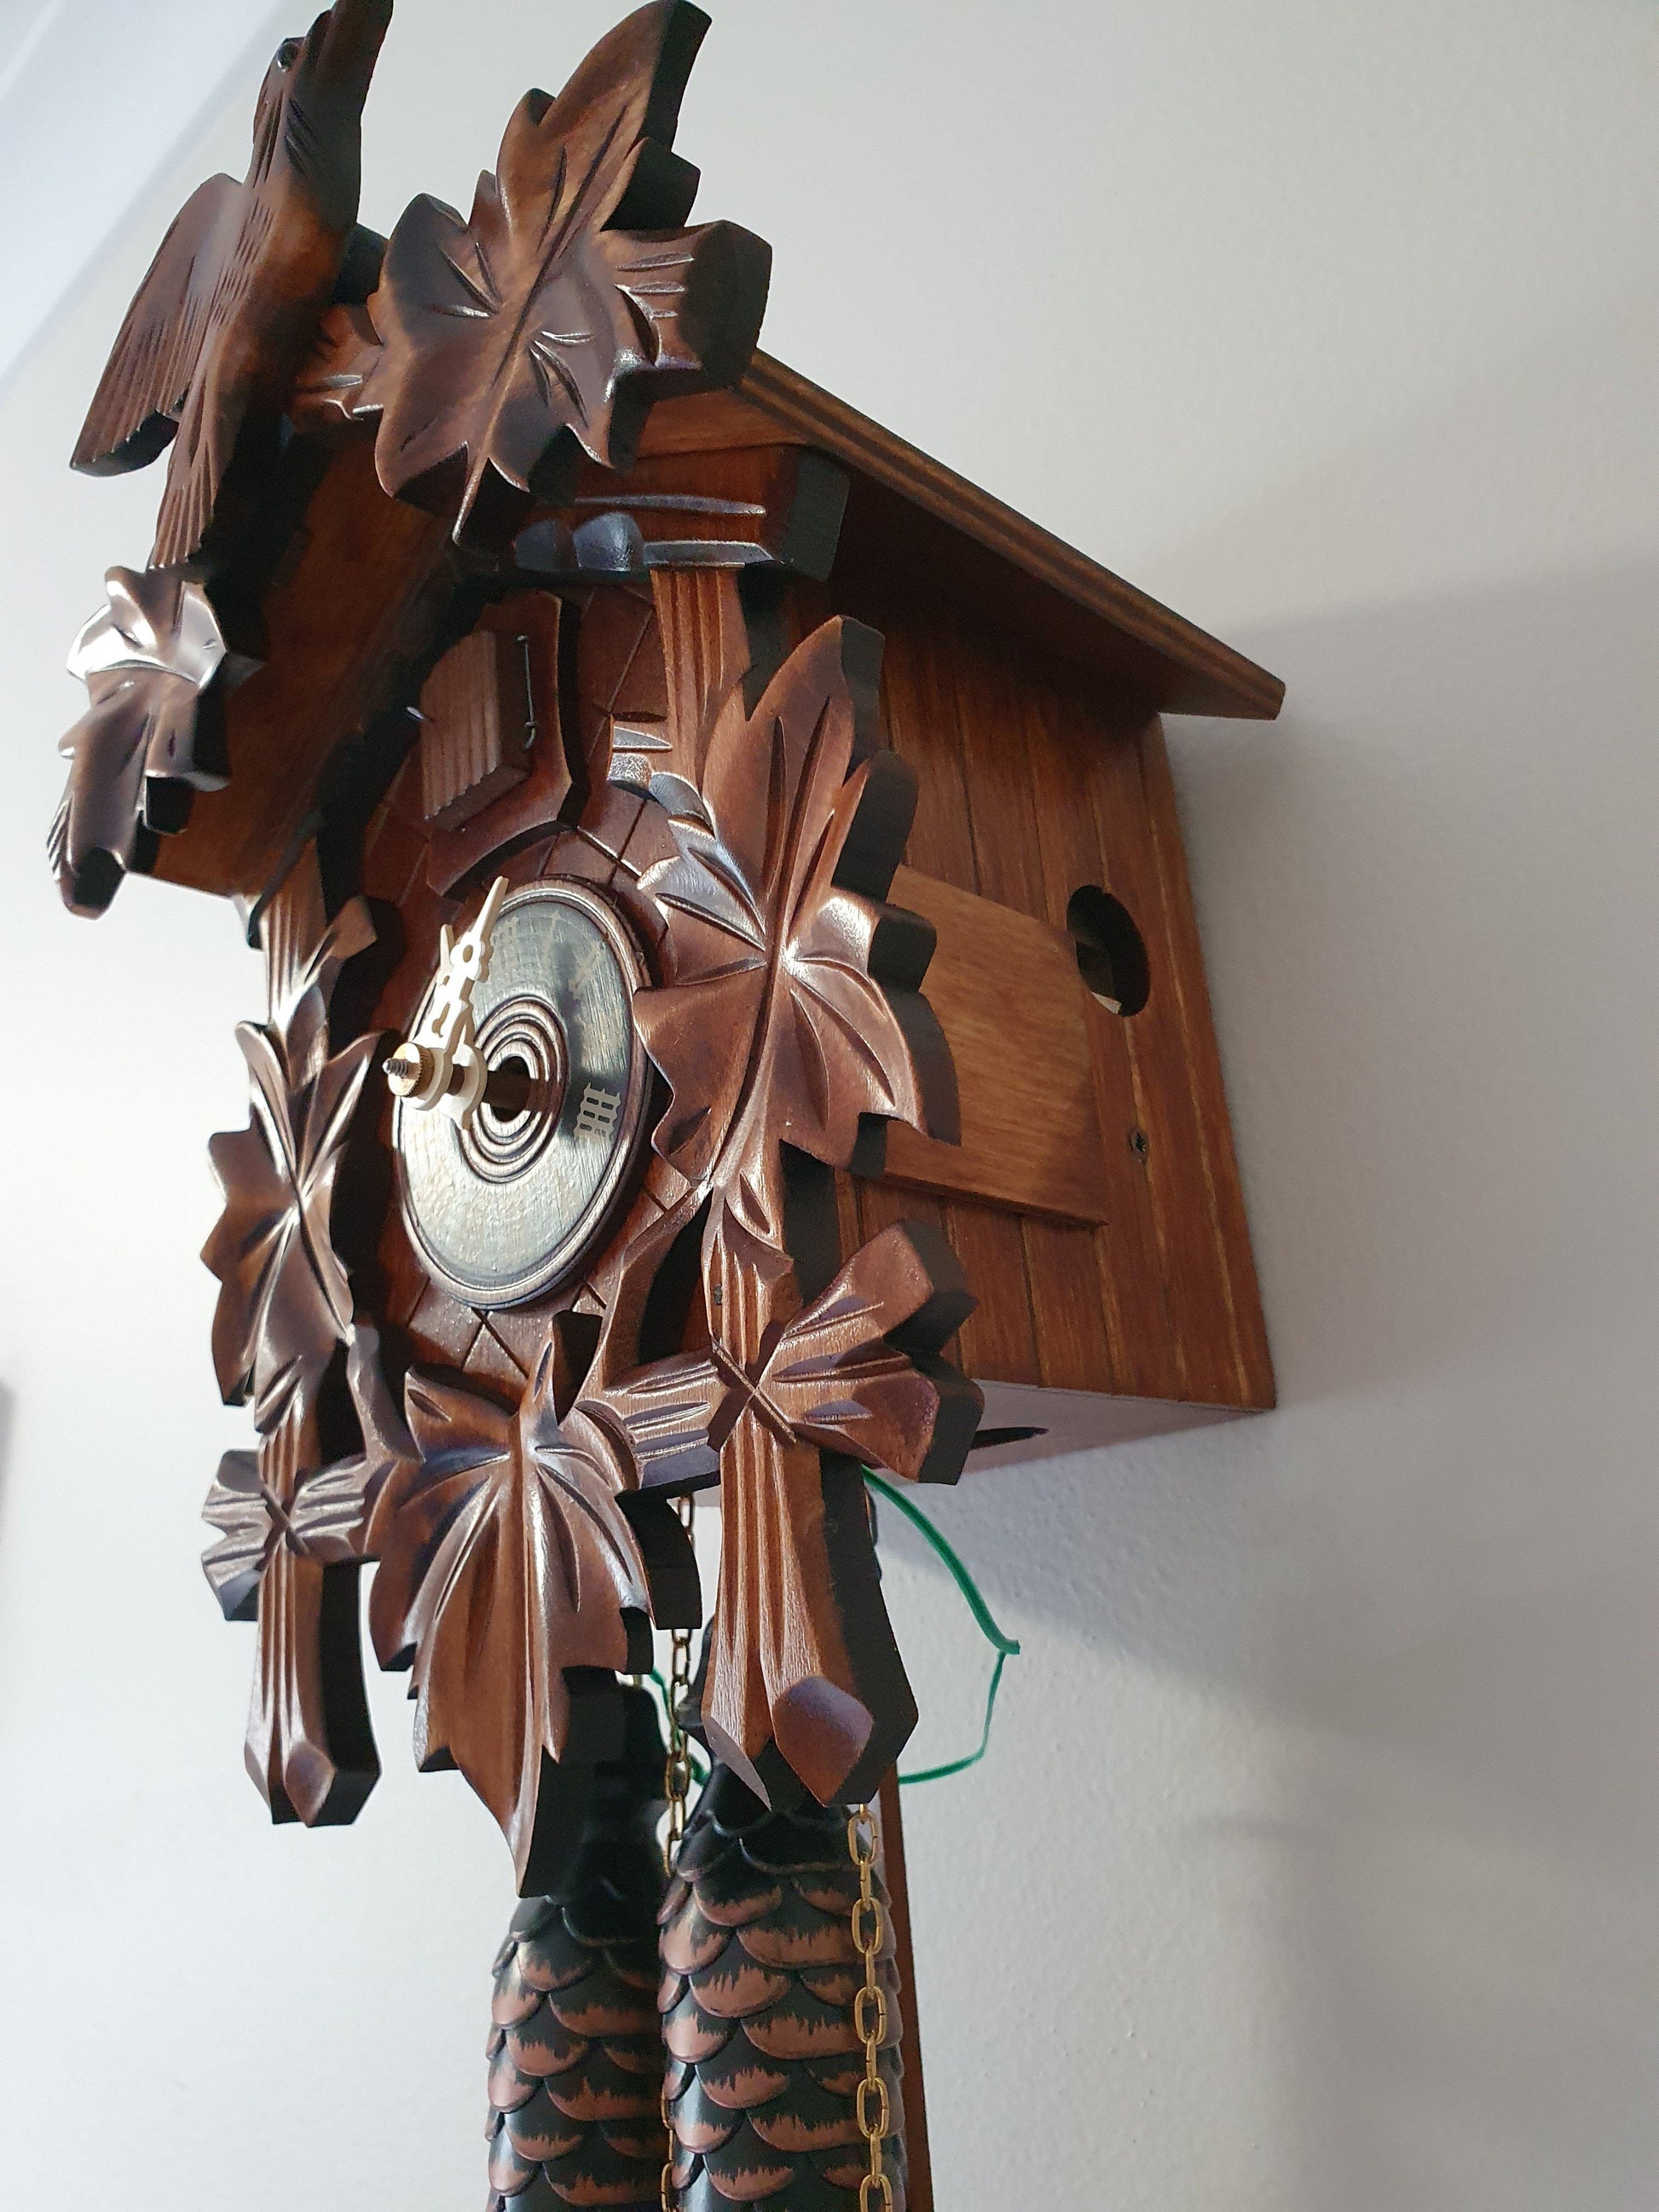 1 Day Mechanical Standard Cuckoo Clock. Made In The Black Forrest Germany With Free Delivery Across Australia. Cuckoo Clock [clocktyme.com] 